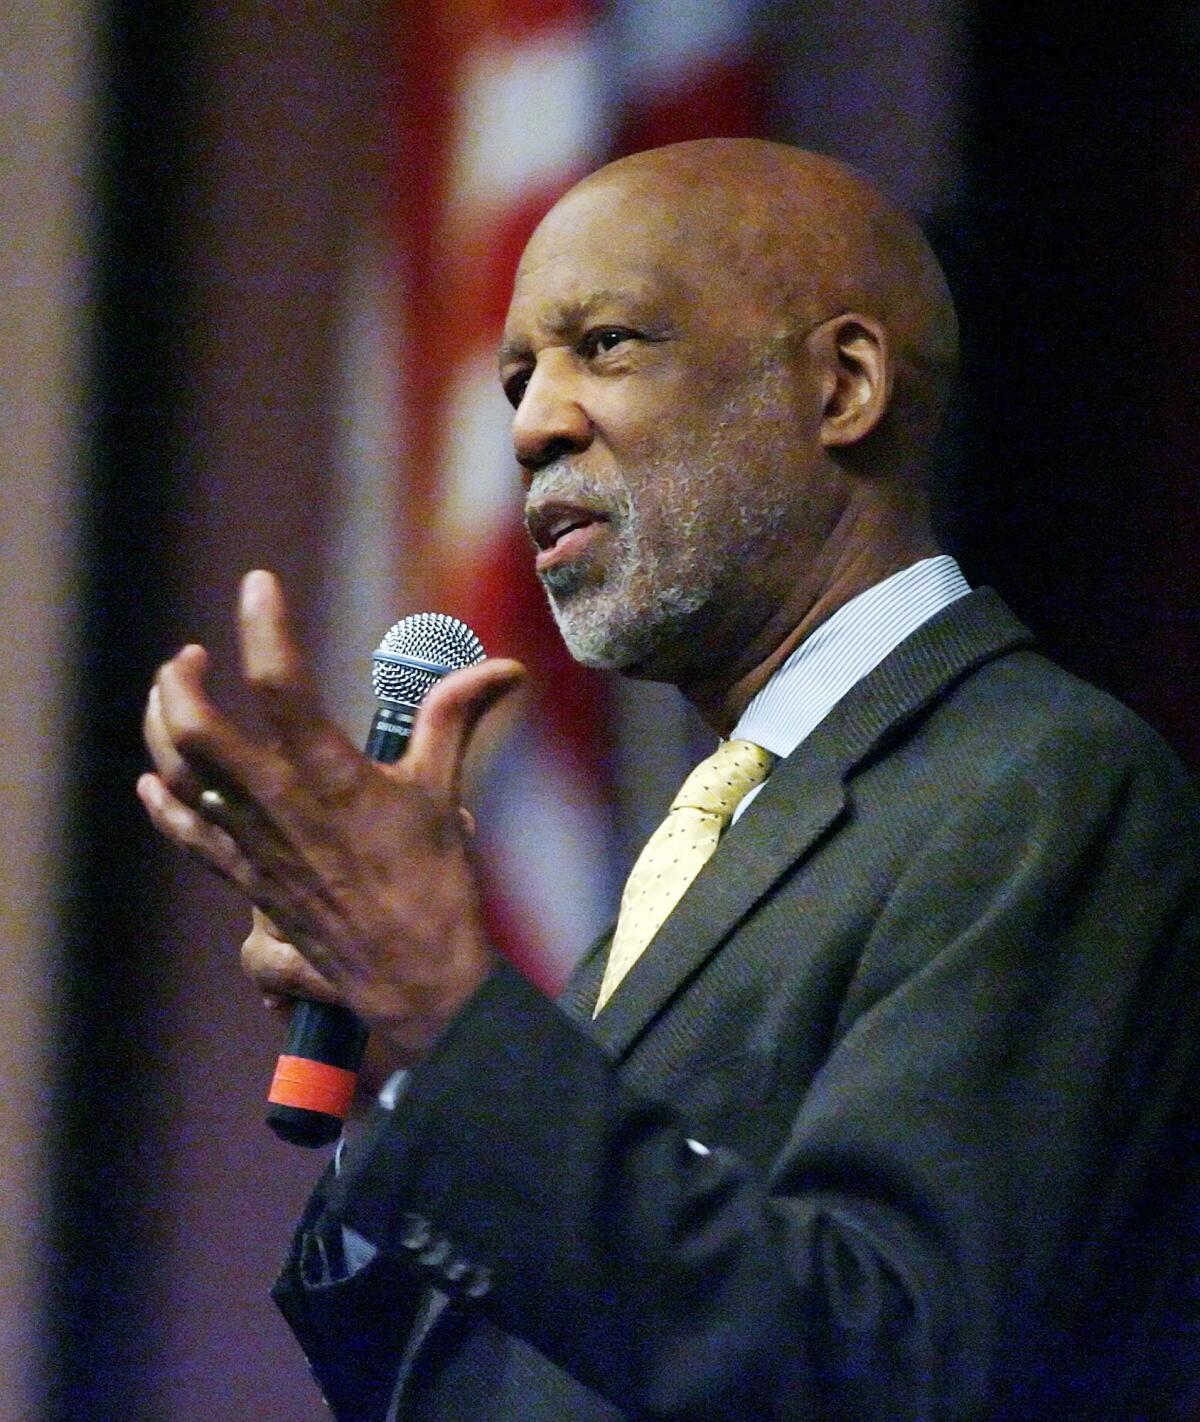 Terrence Roberts, a member of the Little Rock Nine, spoke to a packed house at Glendale Community College on Wednesday about what life was like in the years after court-ordered public school desegregation. Here he's pictured speaking to Hoover High School students in 2012.